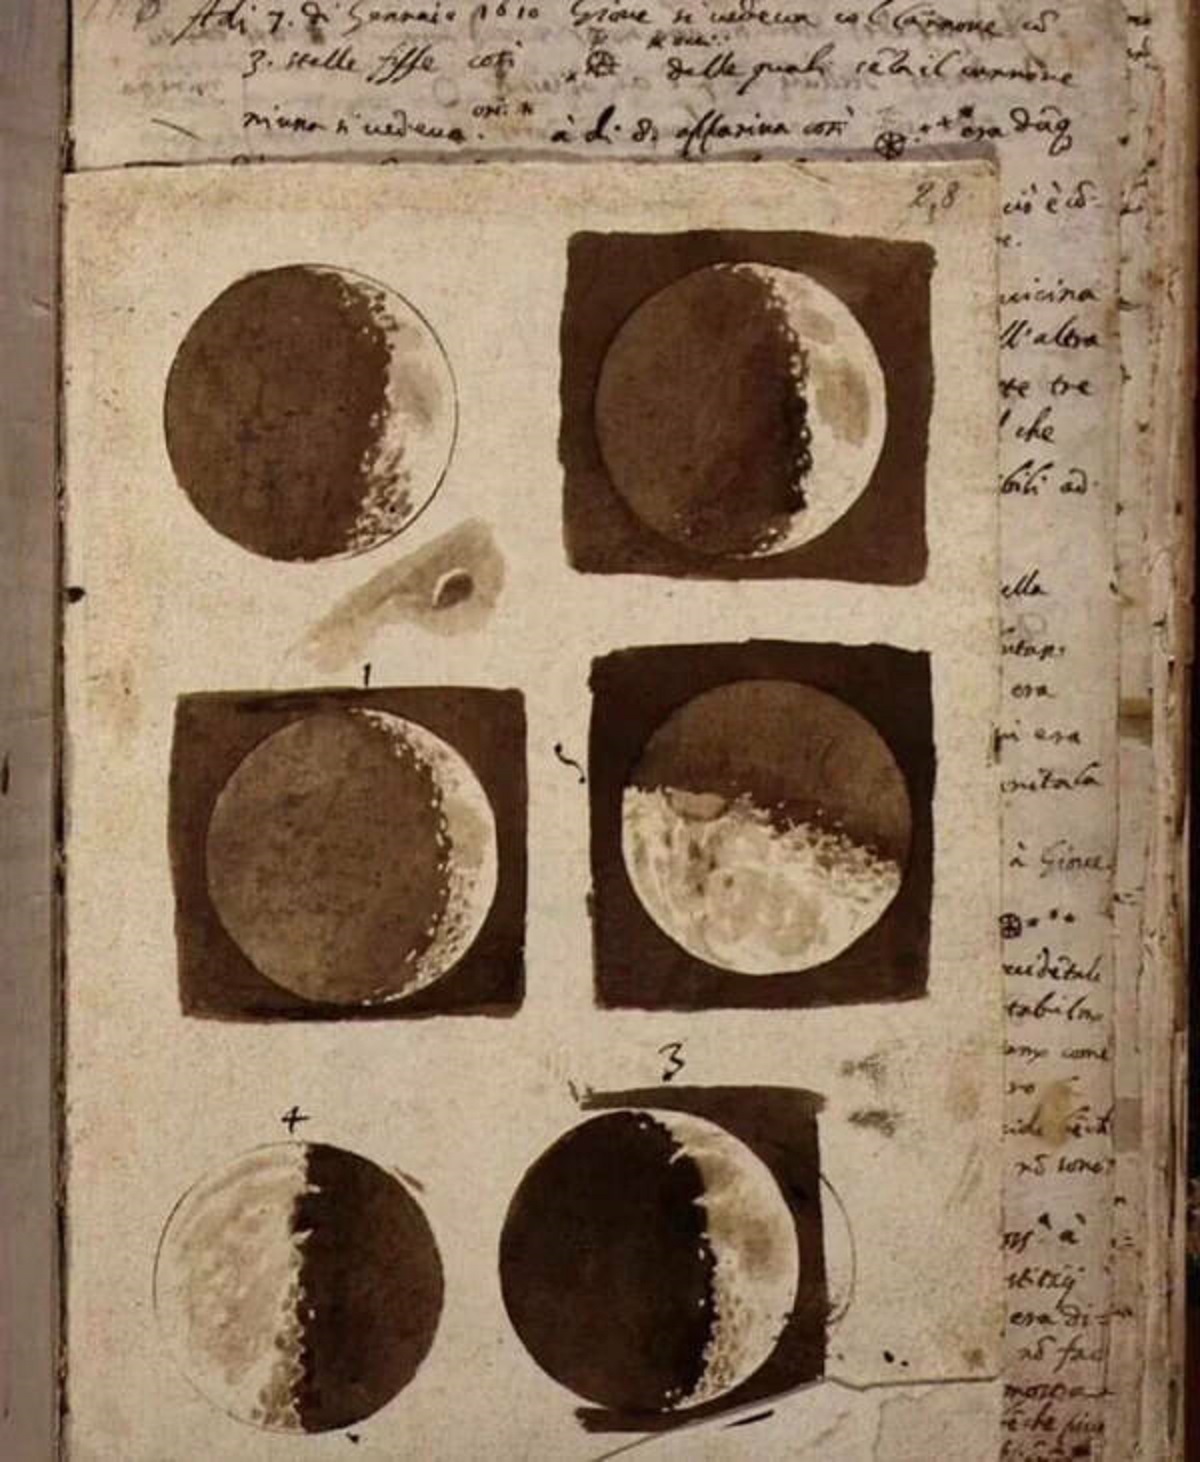 "These are the first detailed drawings of the moon by Galileo Galilei after he observed them through his homemade telescope in 1609."